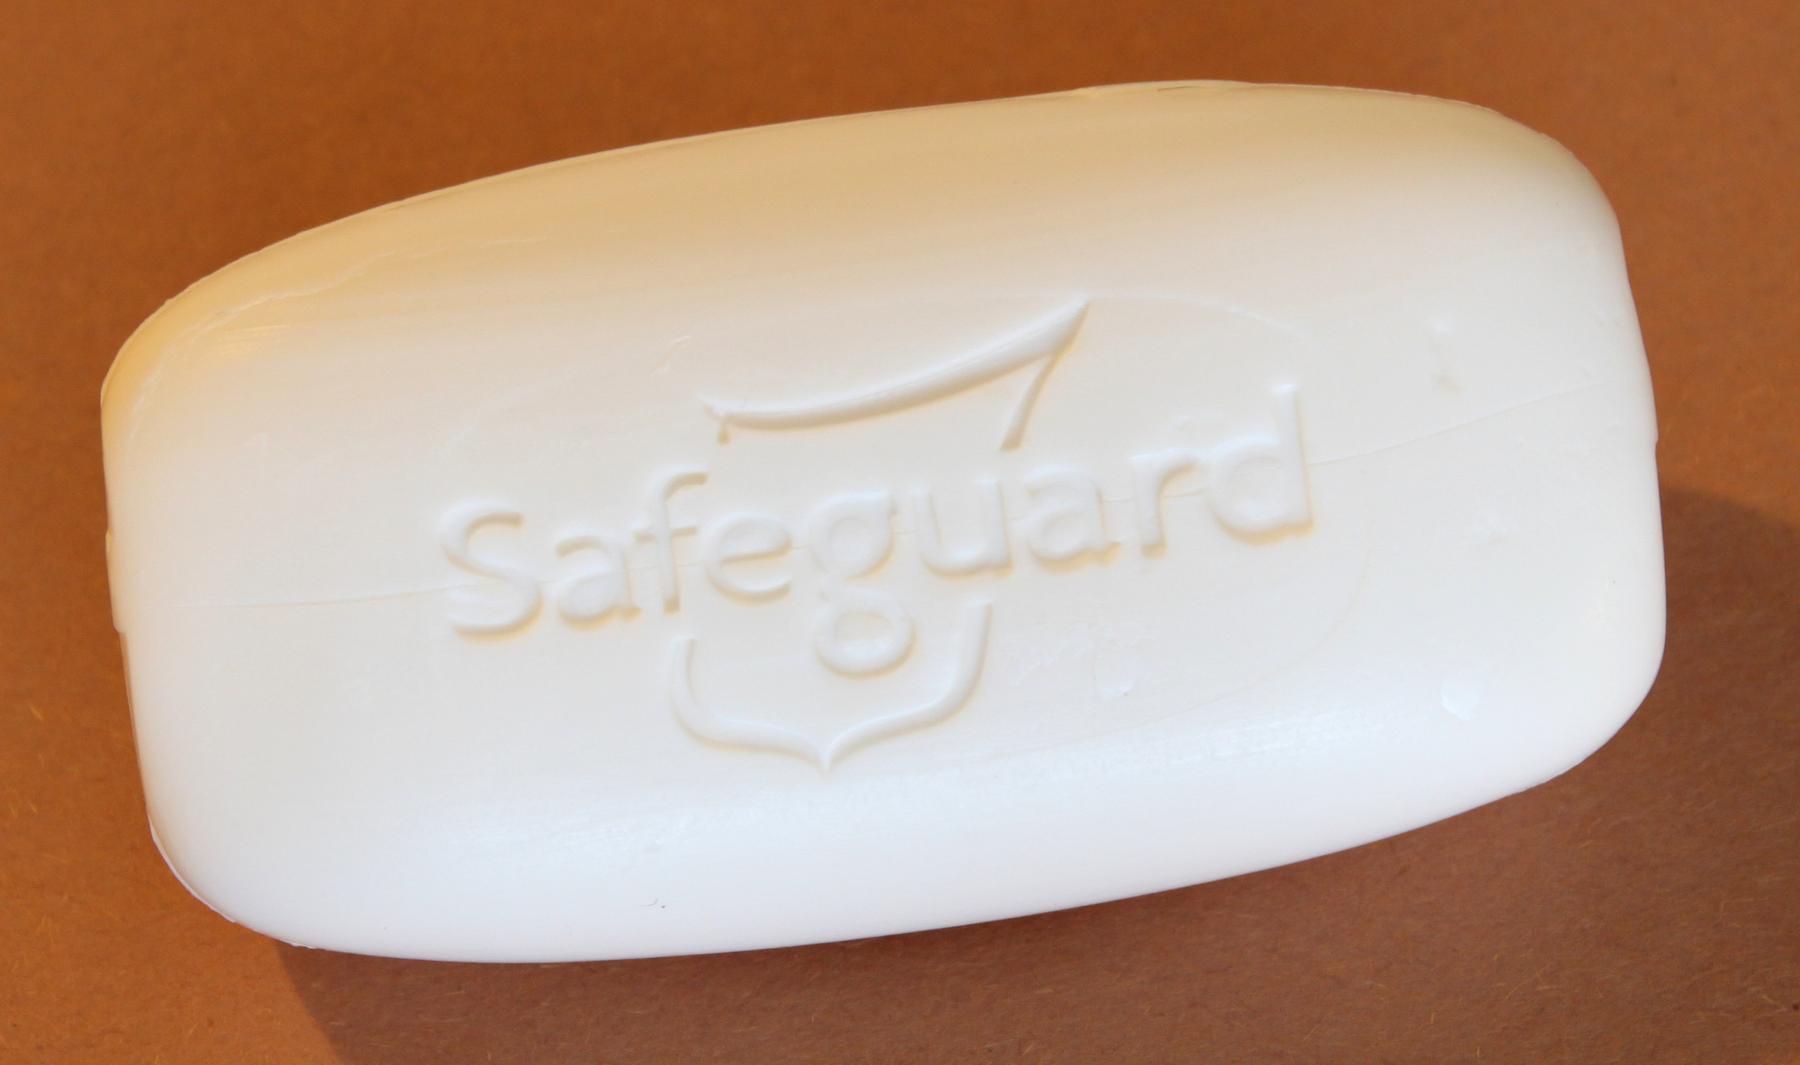 a white soap bar with a white label - File:Bar of Safeguard deodorant soap.JPG